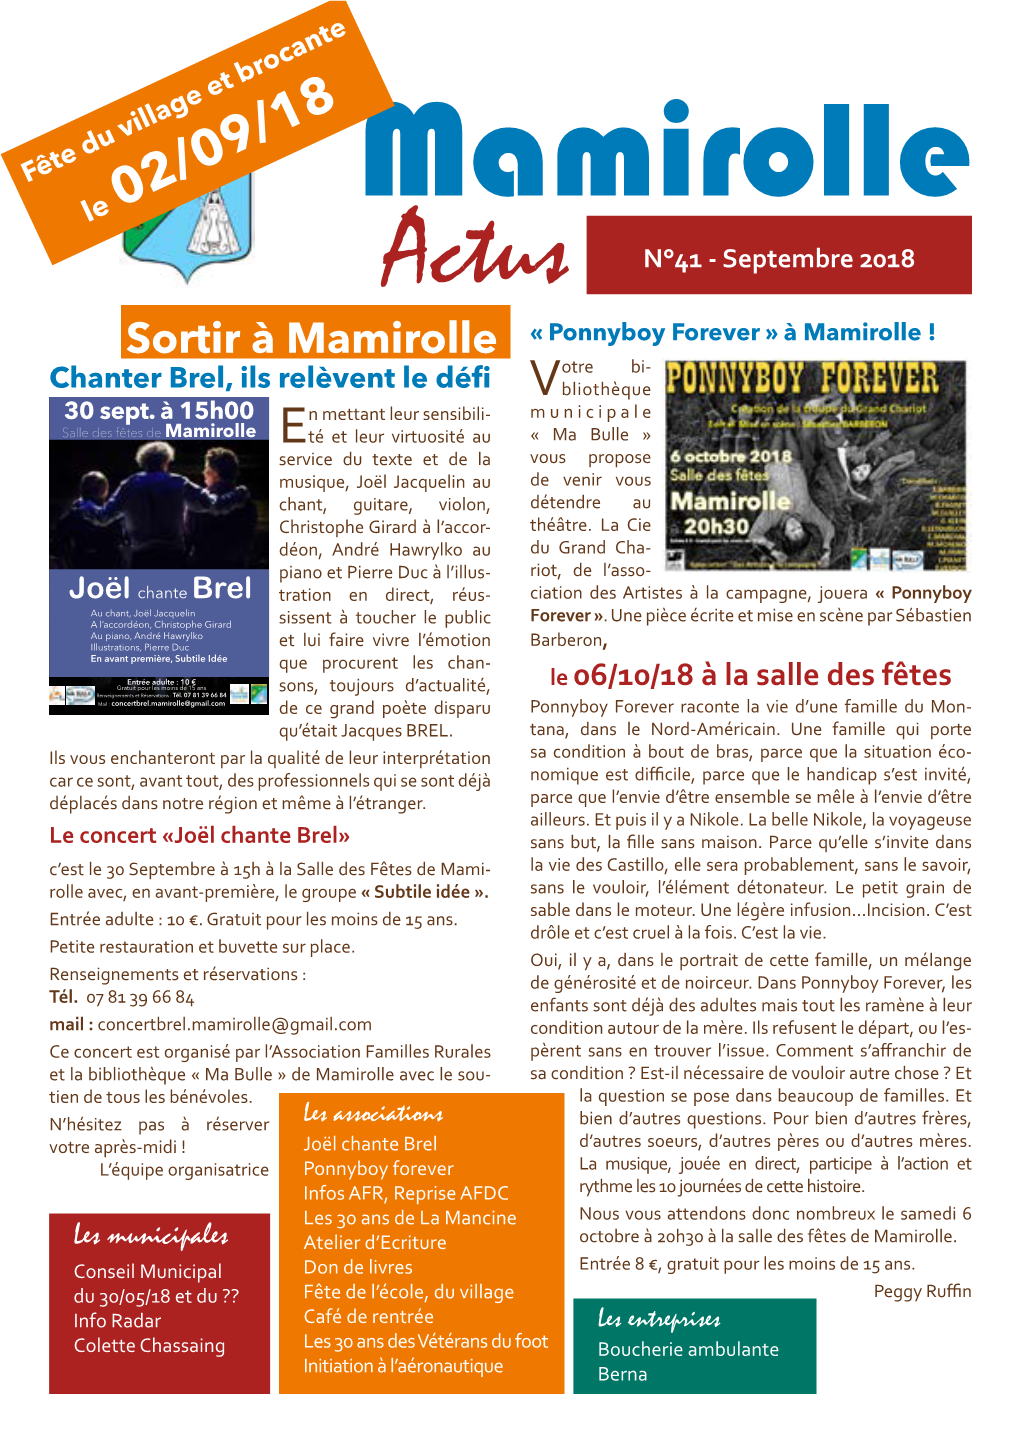 Mamirolle Actus N°41 (Septembre 2018)